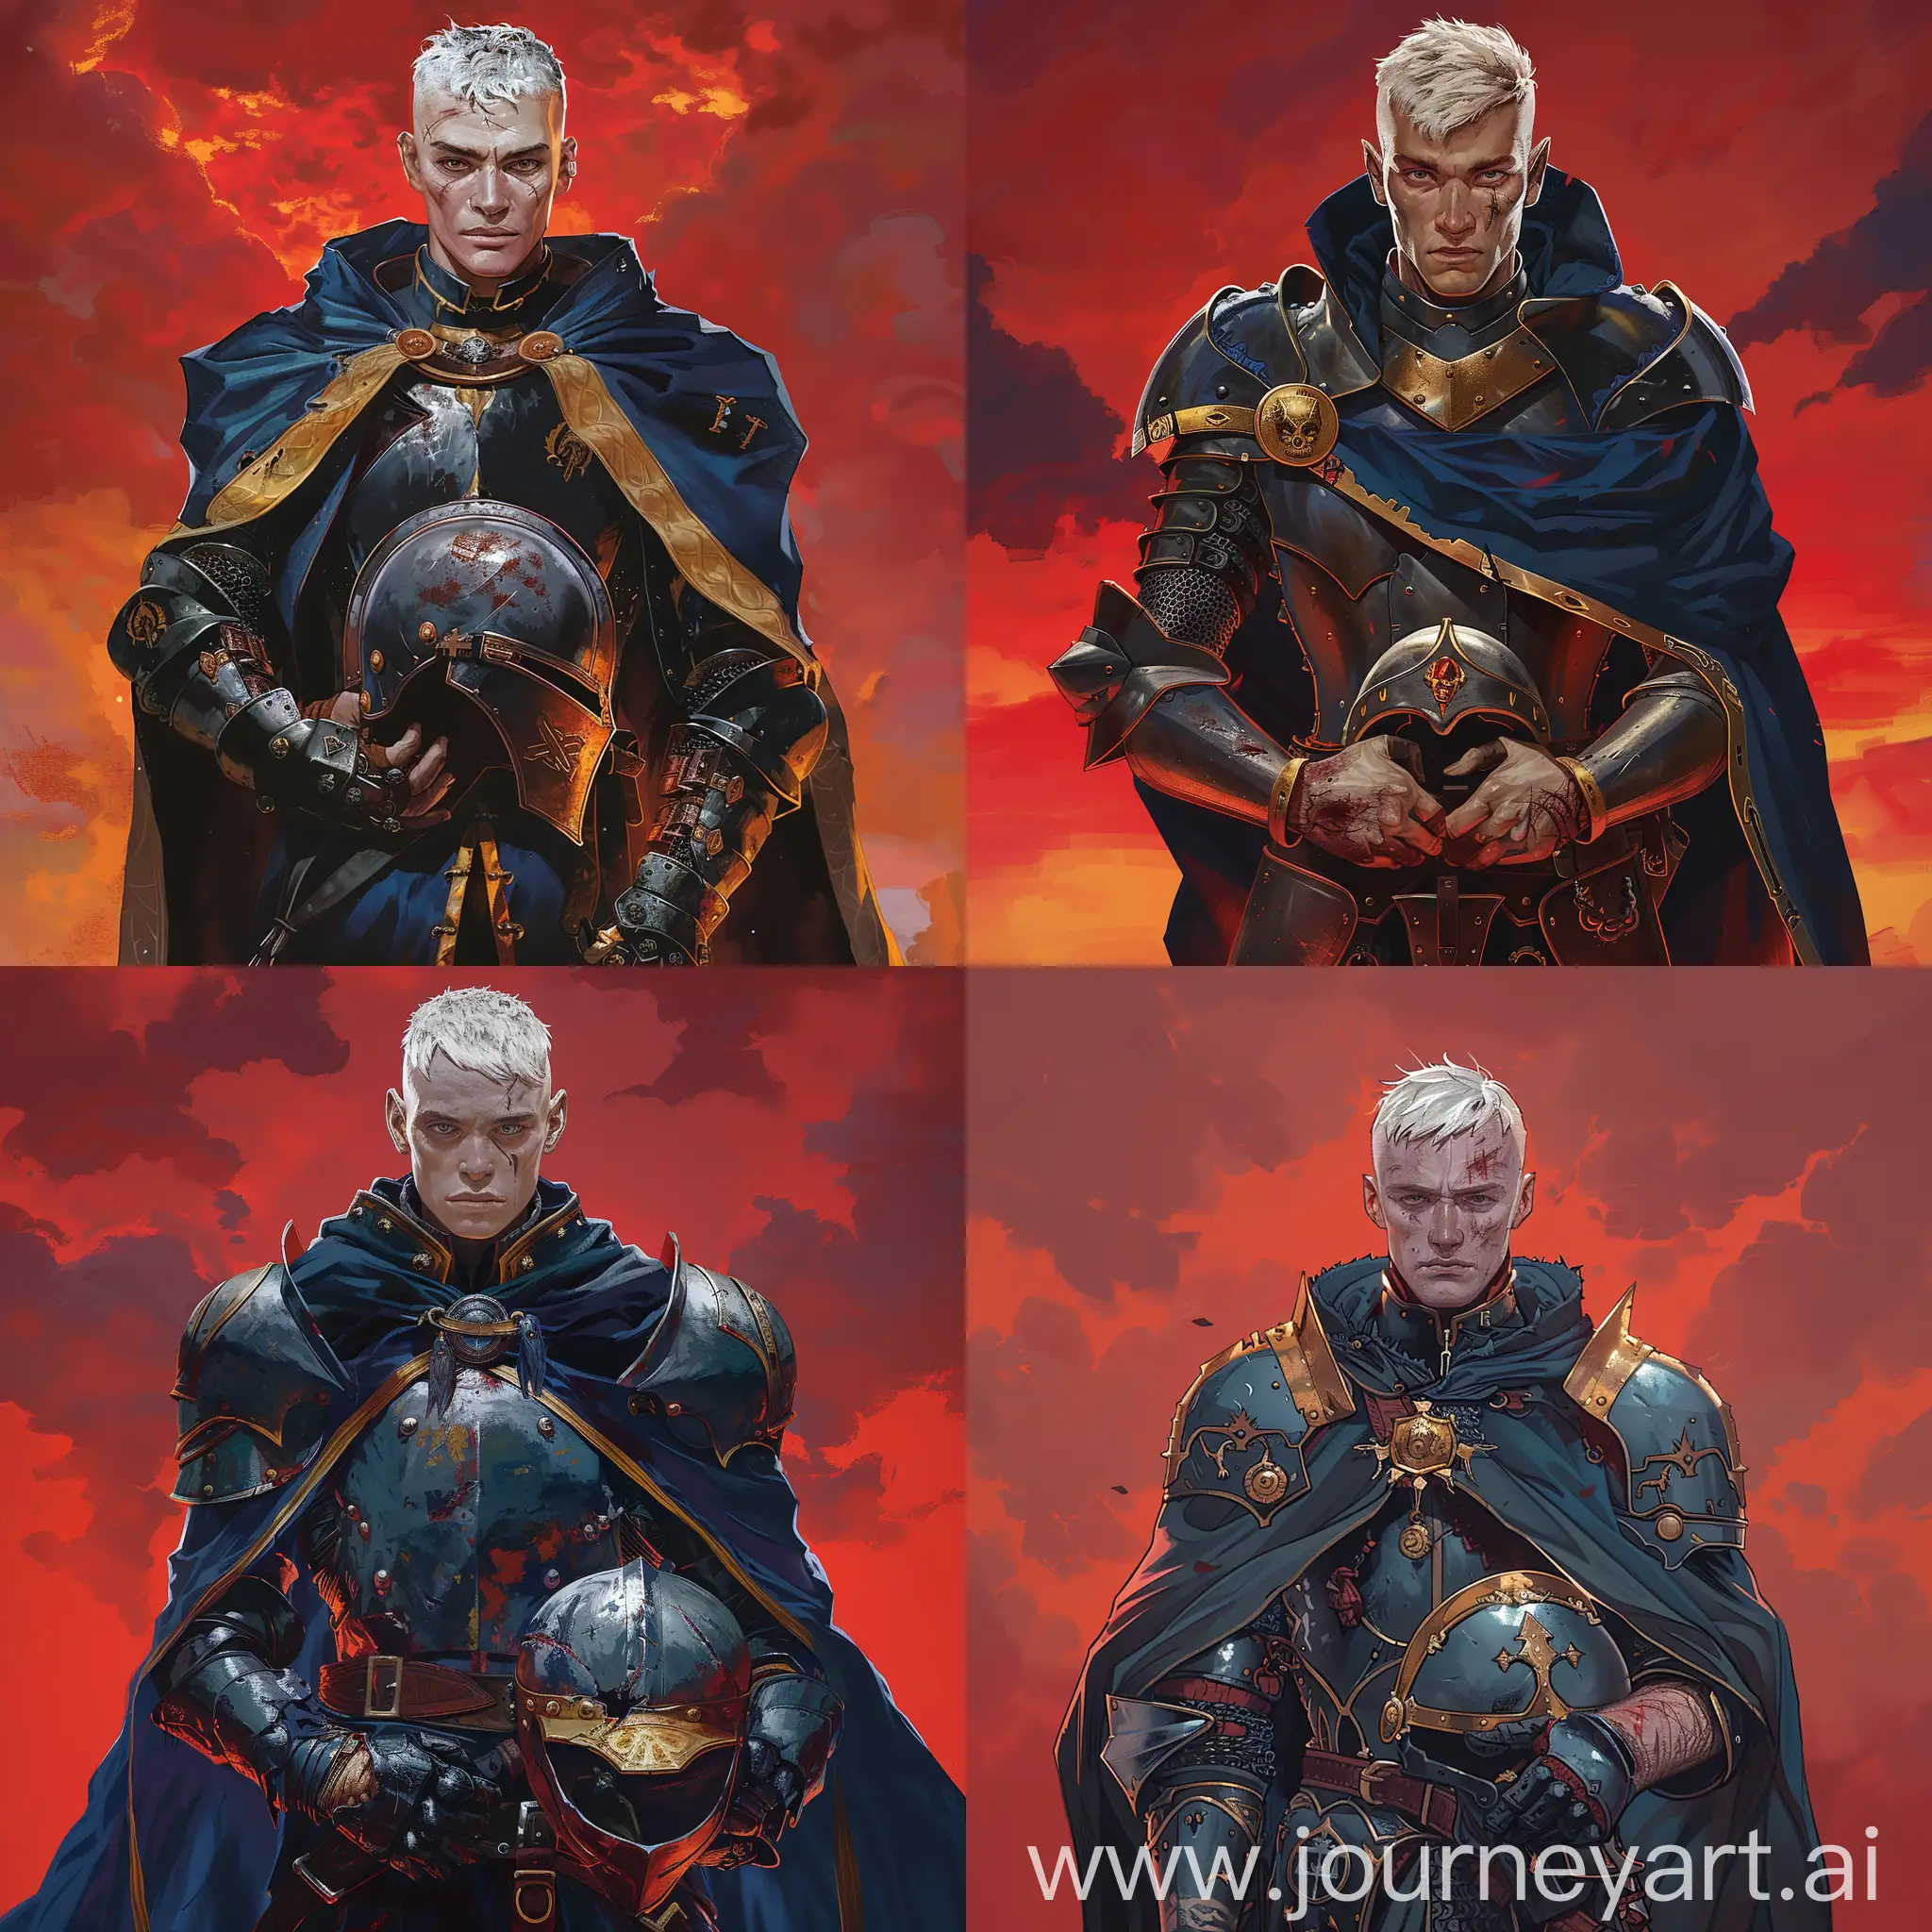 He is male human paladin, with short white hair bowl haircut, tall, wearing knight's armor with a dark blue cloak with gold trim, he has a helmet in his hands, he has pale skin and scars on his face. Red sky background